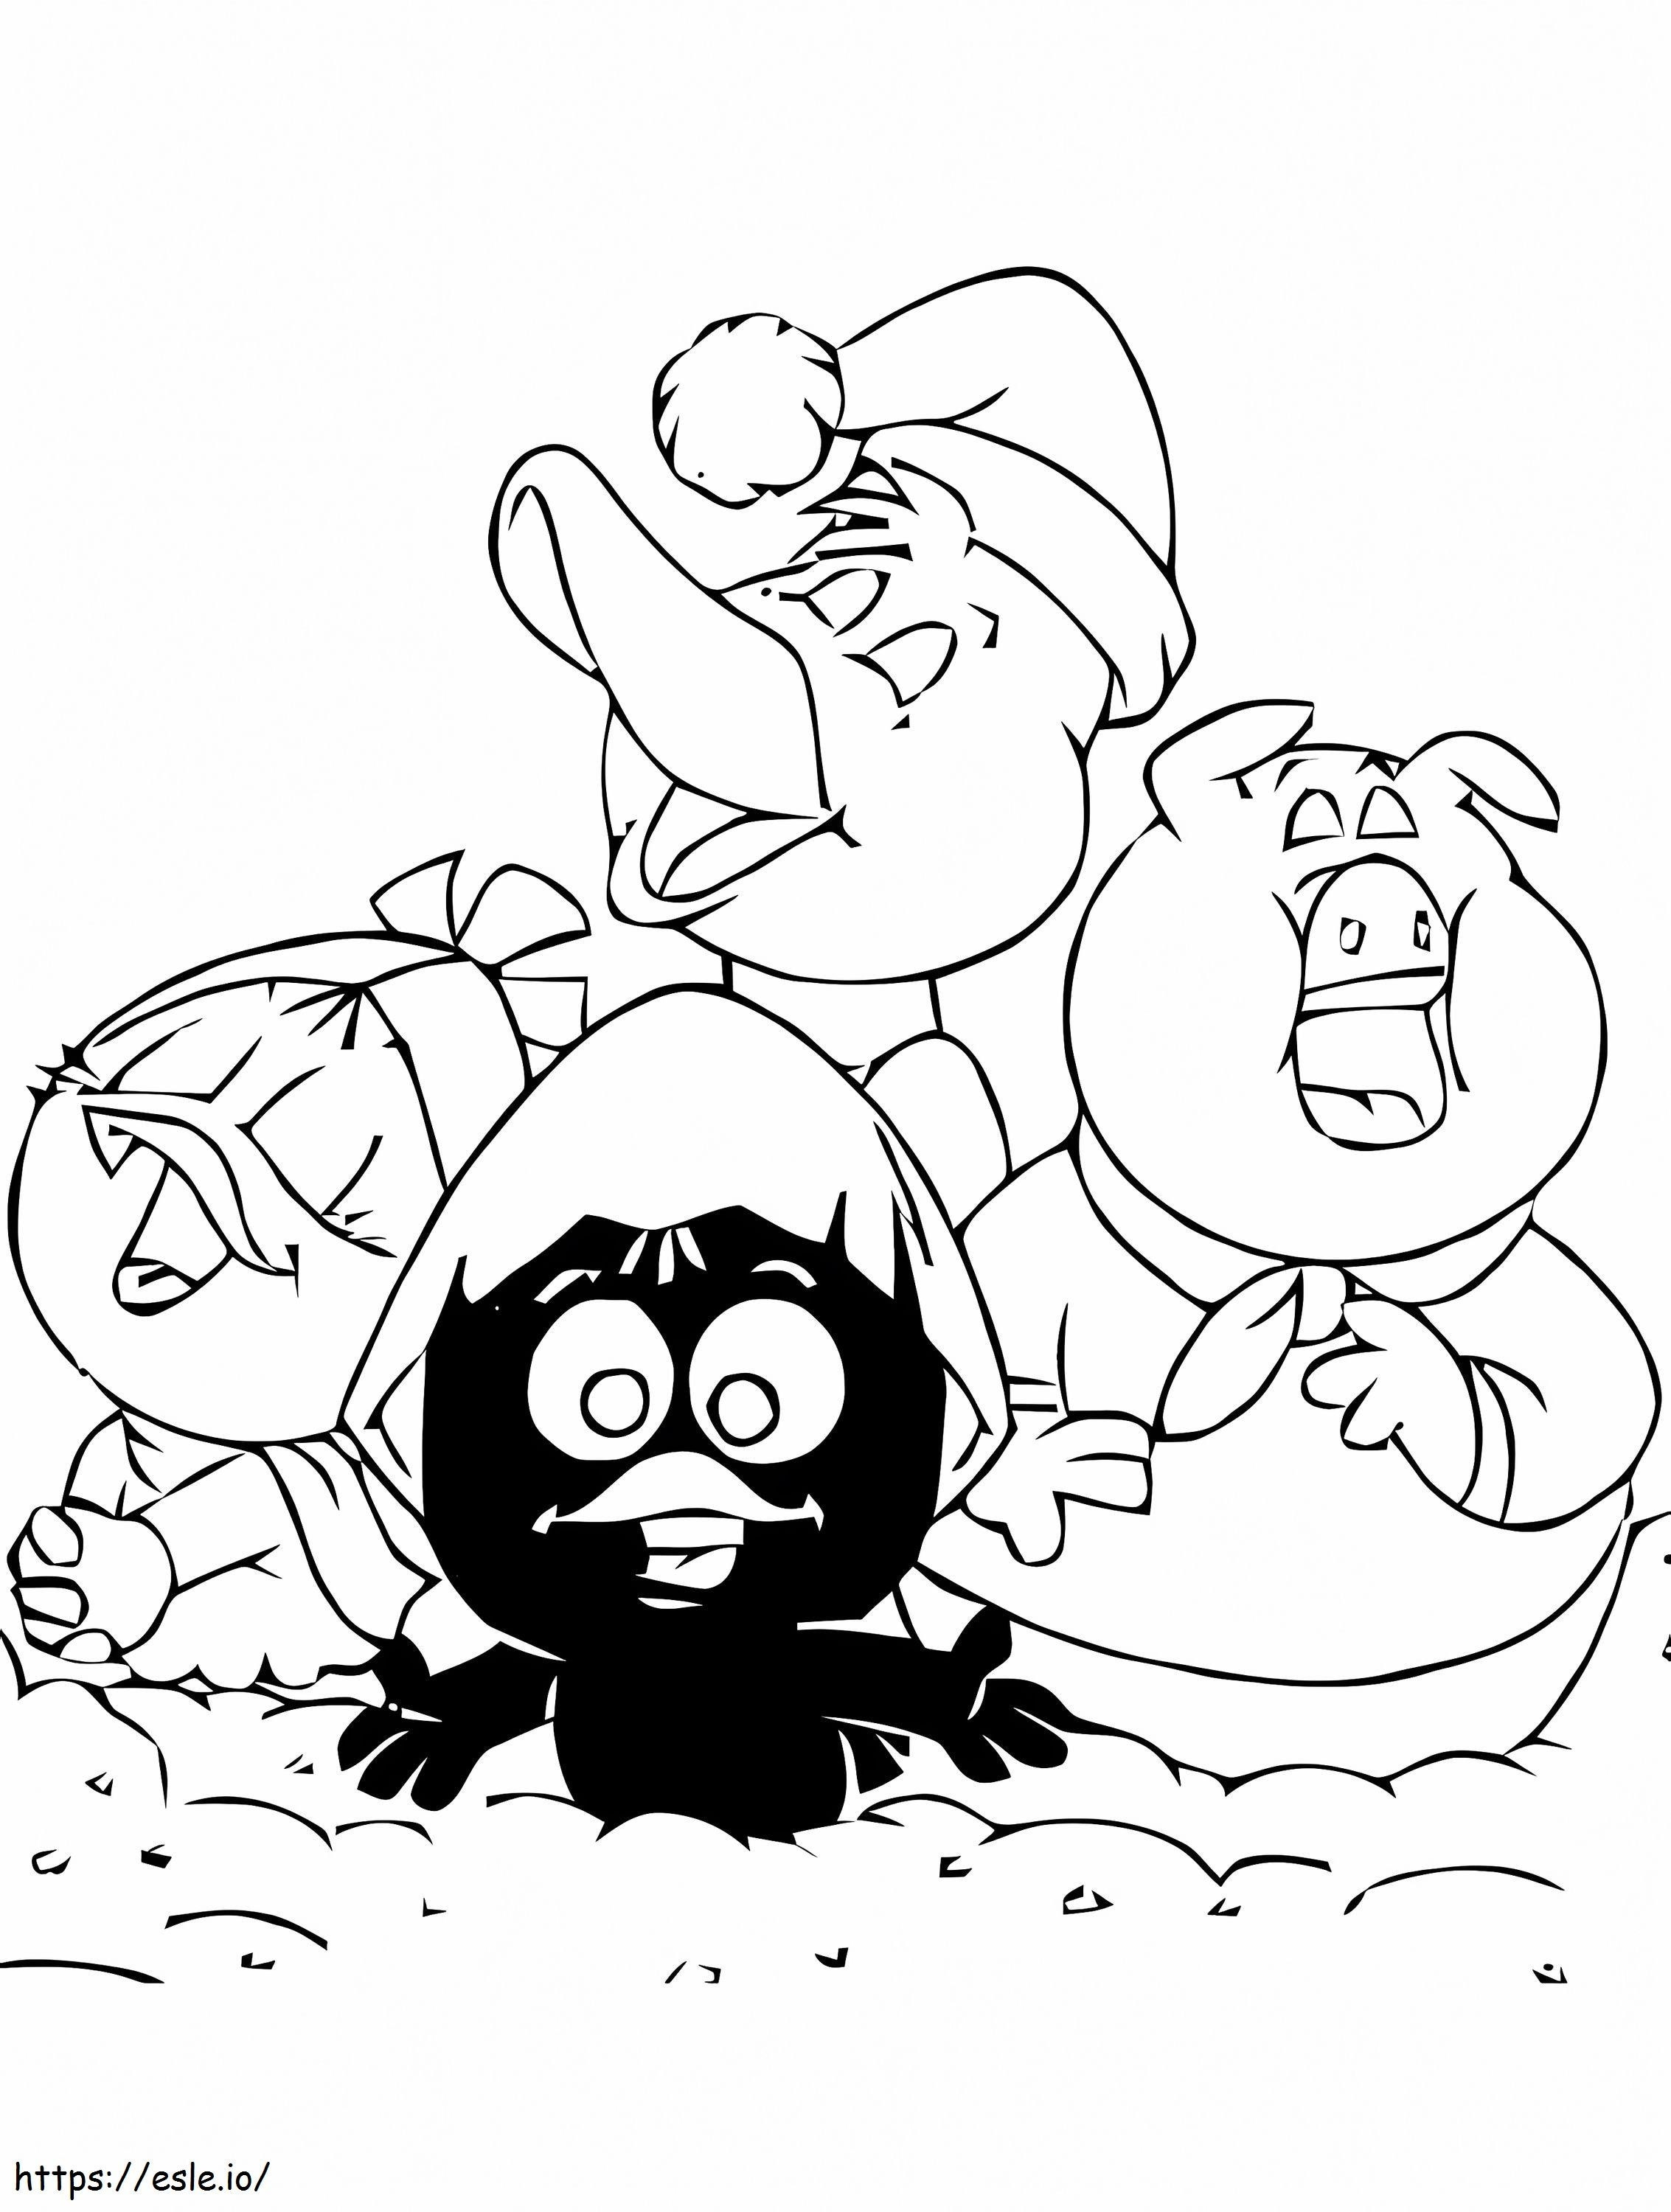 1599870166 Coloring For Kids Calimero 72892 coloring page